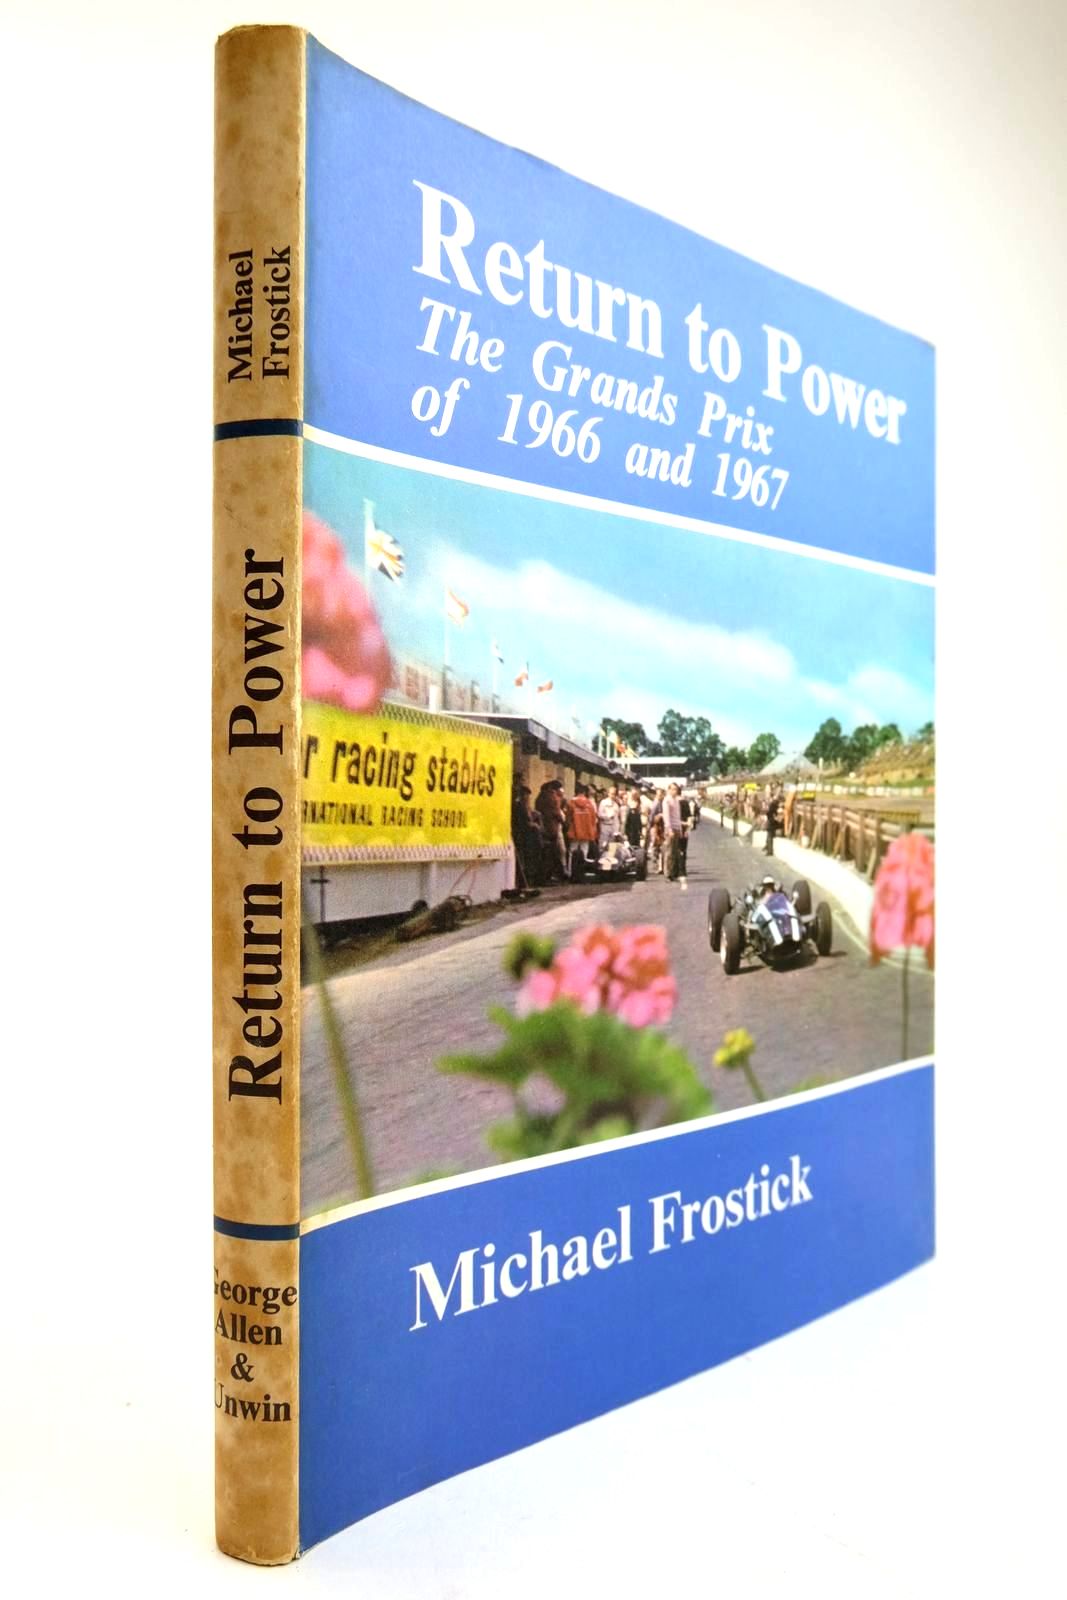 Photo of RETURN TO POWER written by Frostick, Michael published by George Allen & Unwin Ltd. (STOCK CODE: 2134310)  for sale by Stella & Rose's Books